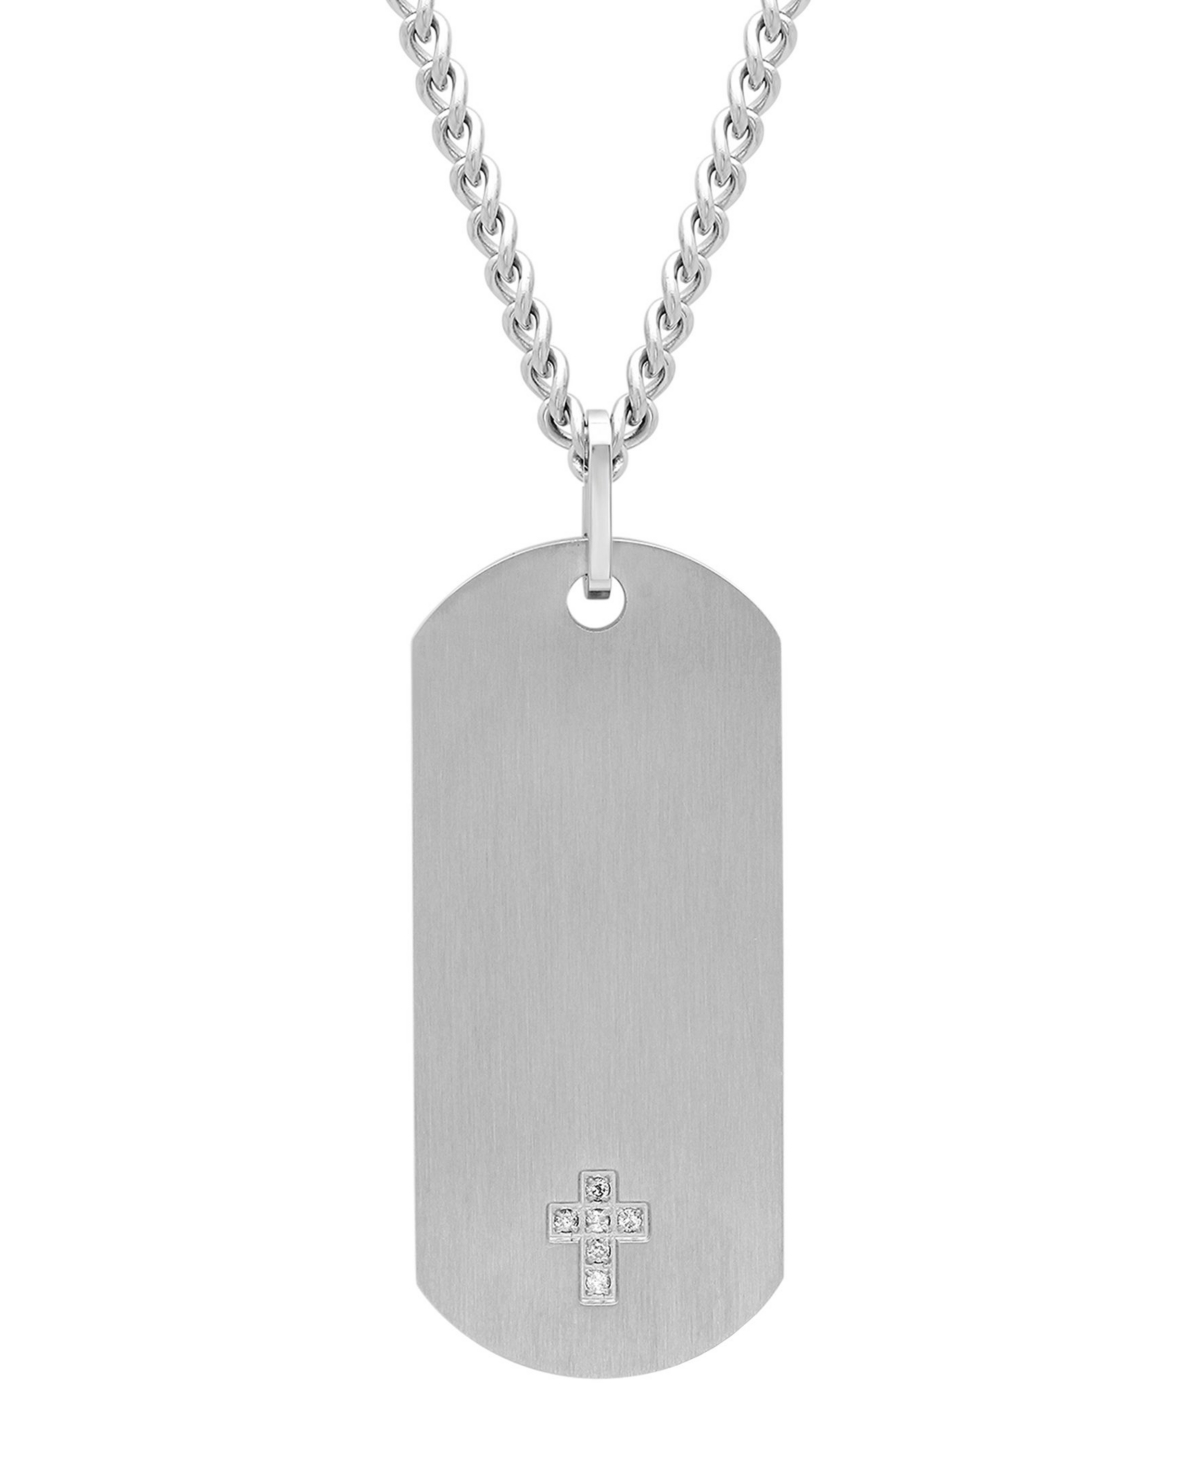 C & c Jewelry Men's Diamond Accent Dog Tag in Stainless Steel Pendant Necklace